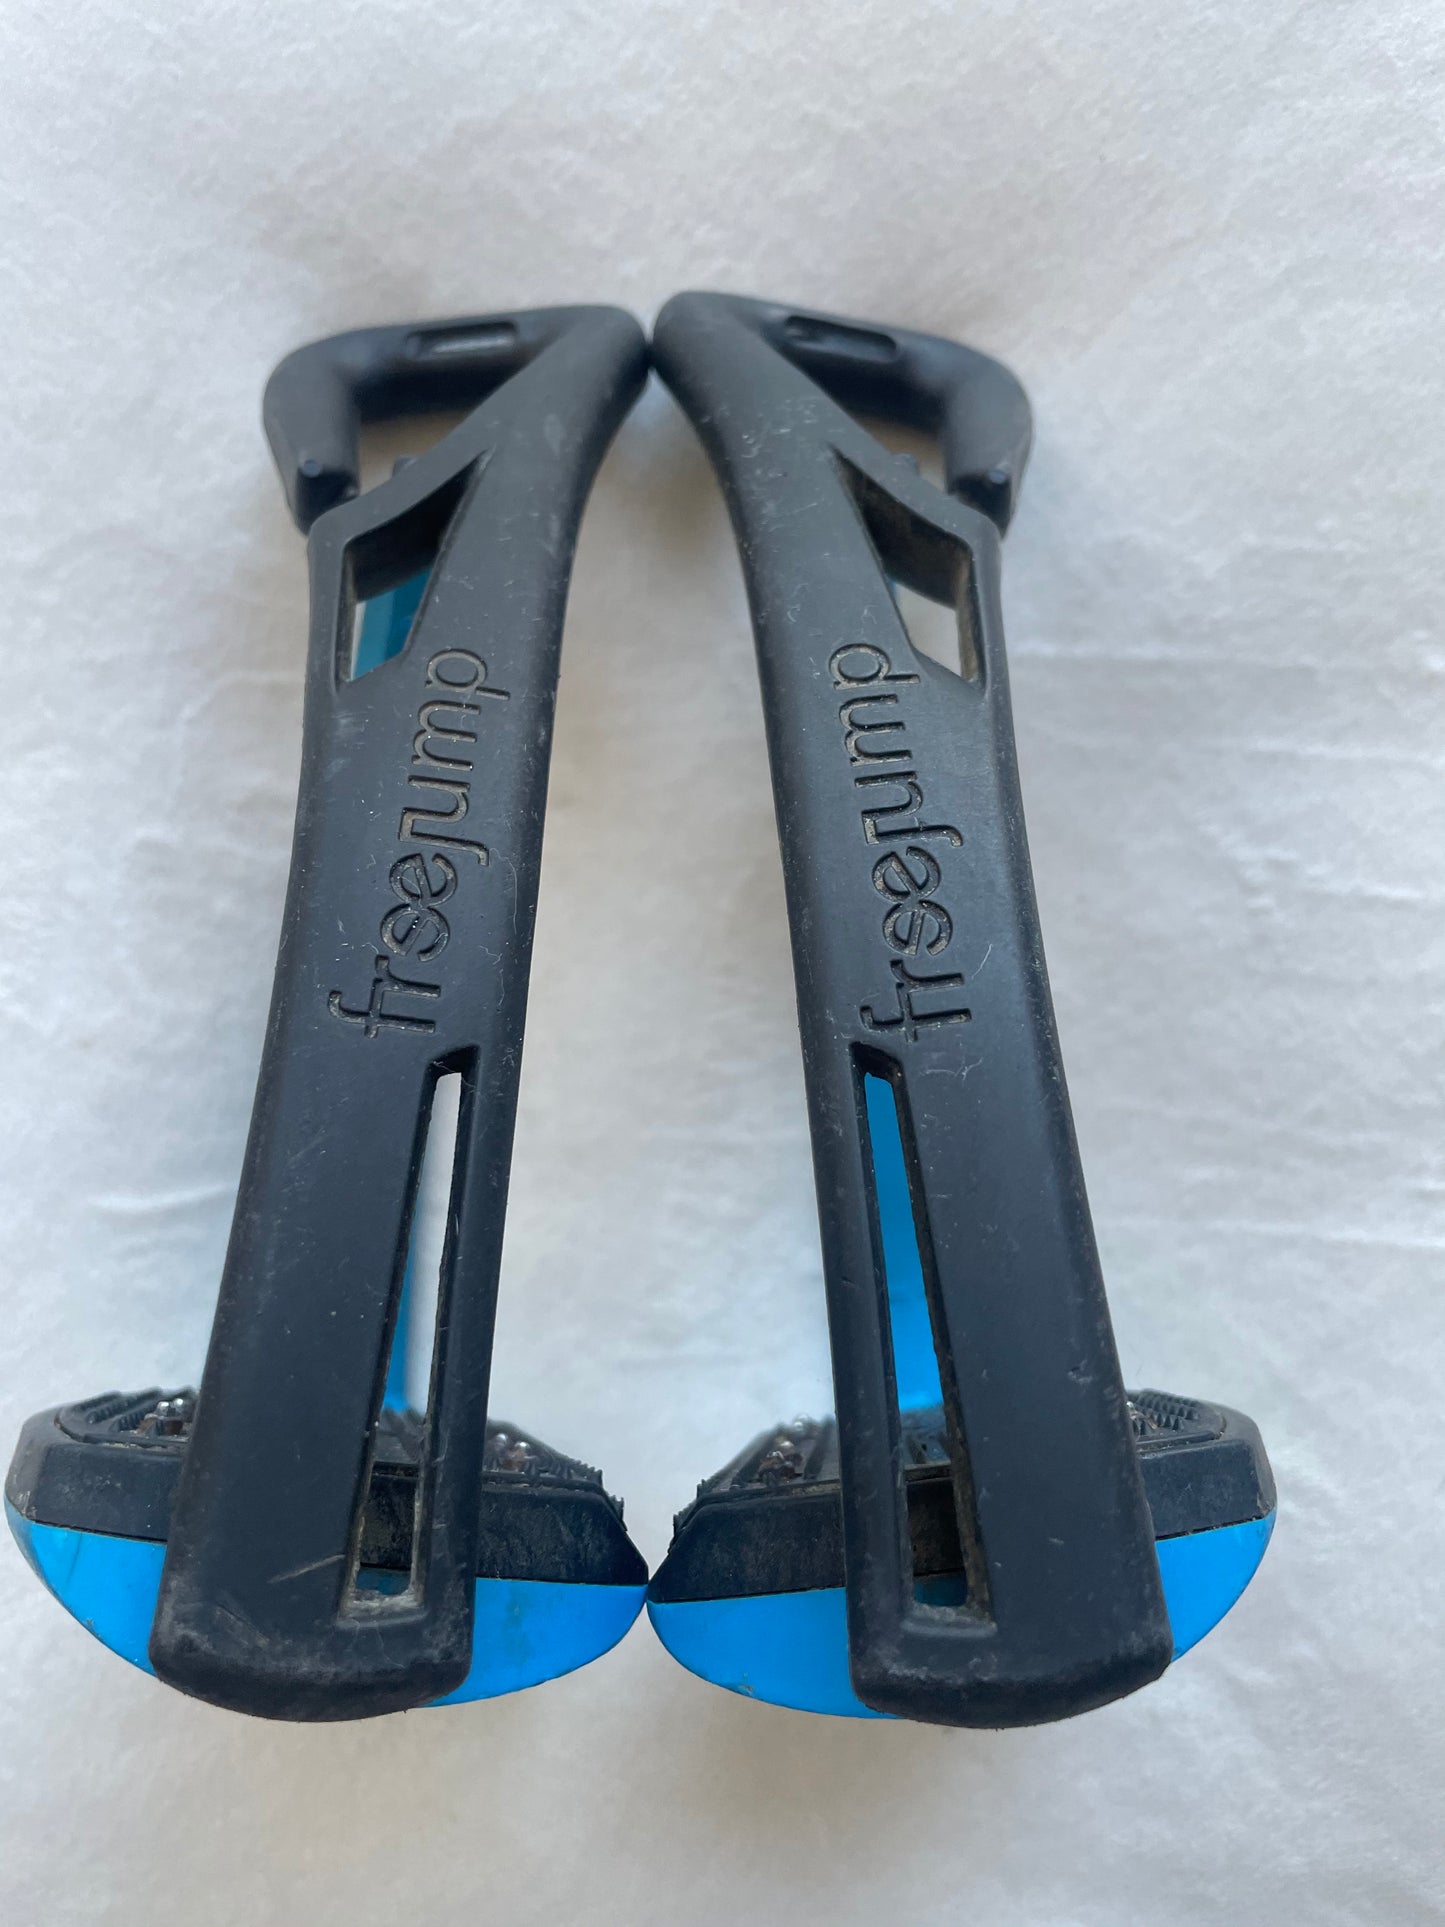 FreeJump Softup Pro - Blue, Very Nice Condition